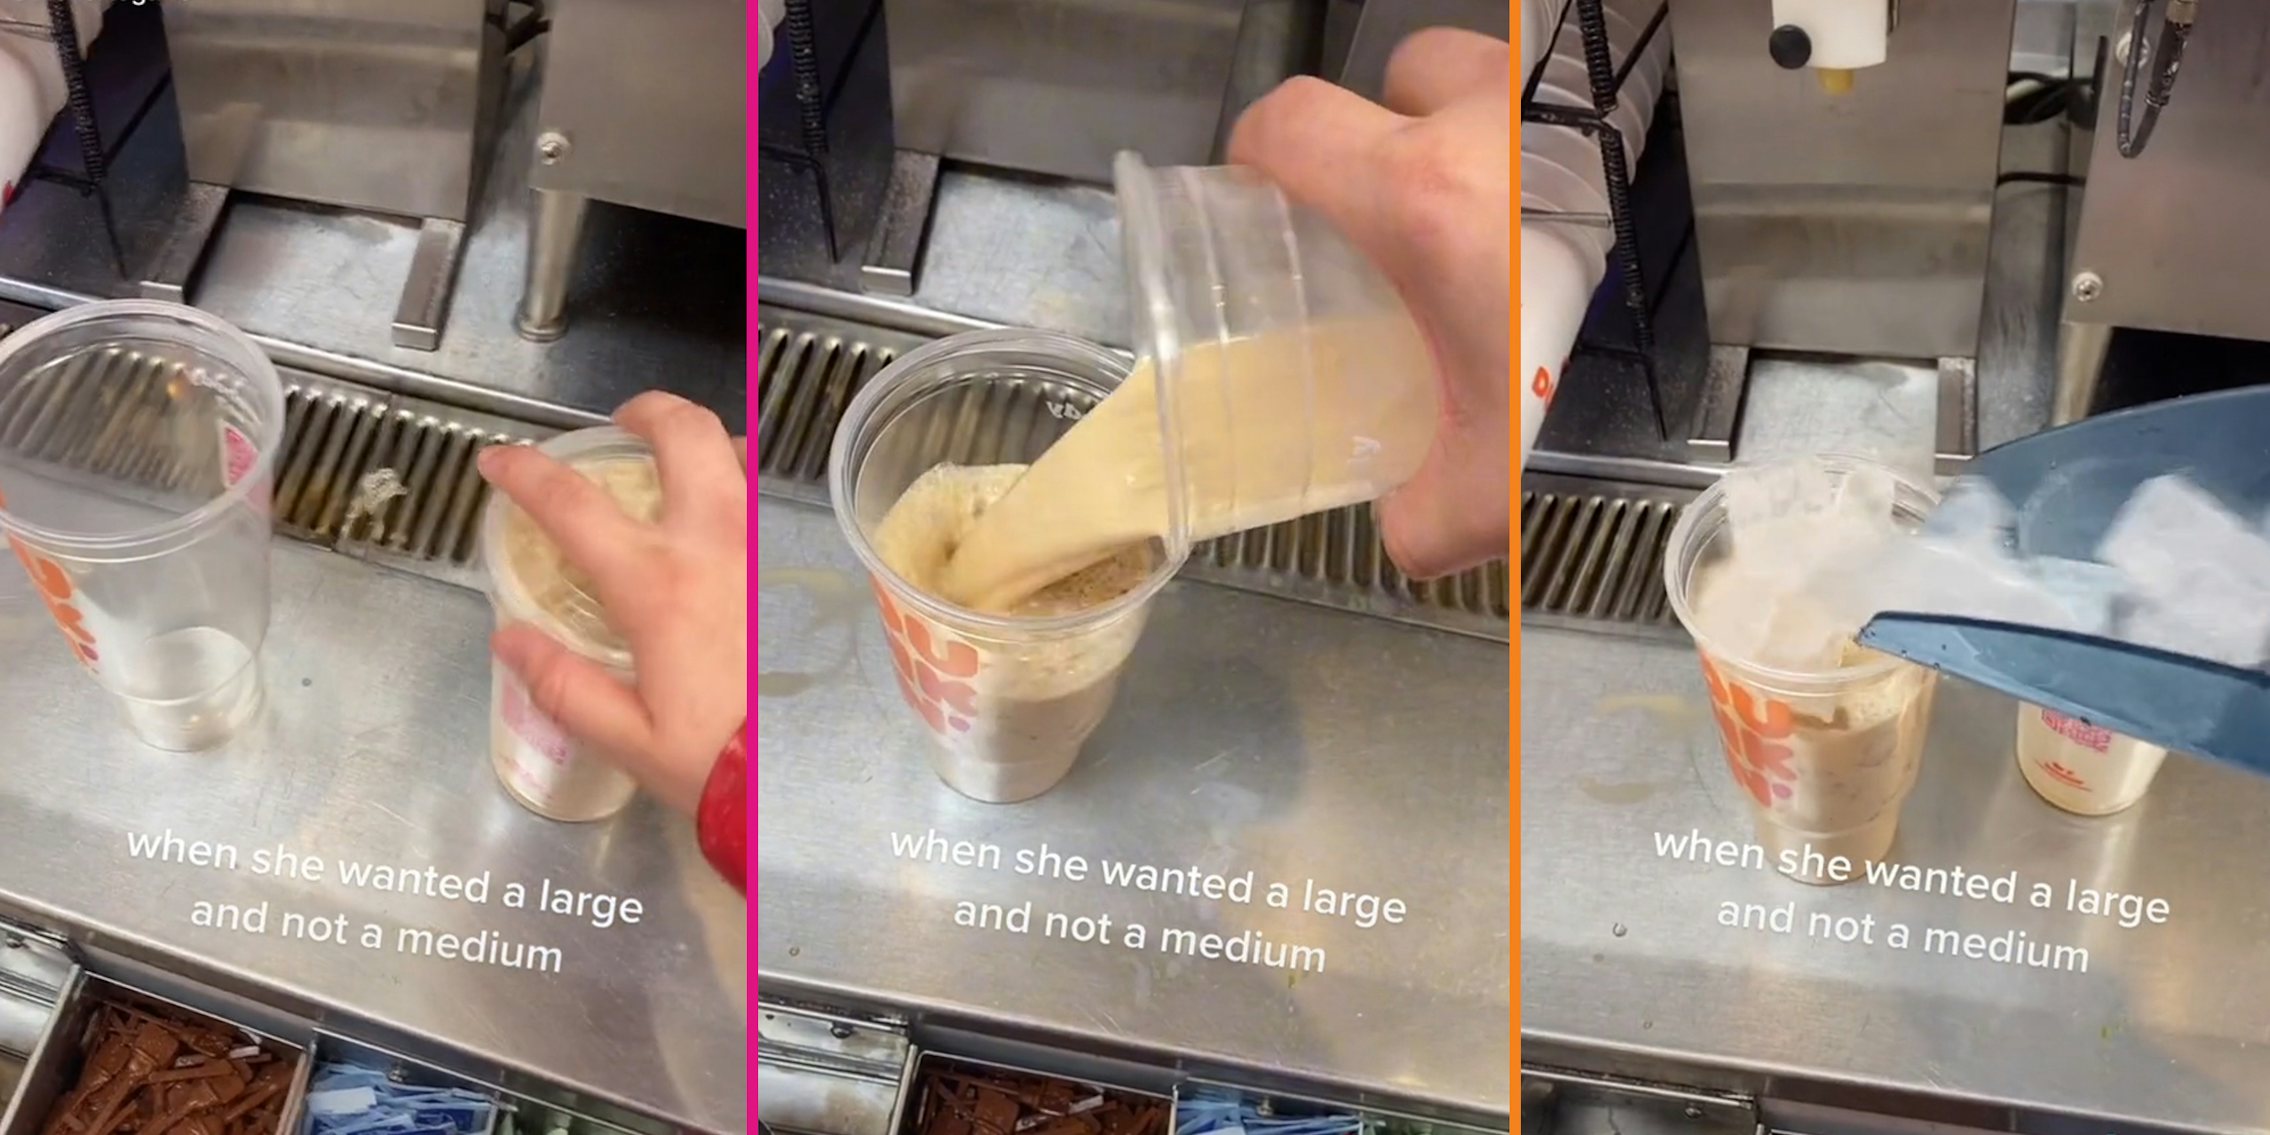 dunkin donuts worker pouring medium into large cup and adding ice with caption 'when she wanted a large and not a medium'